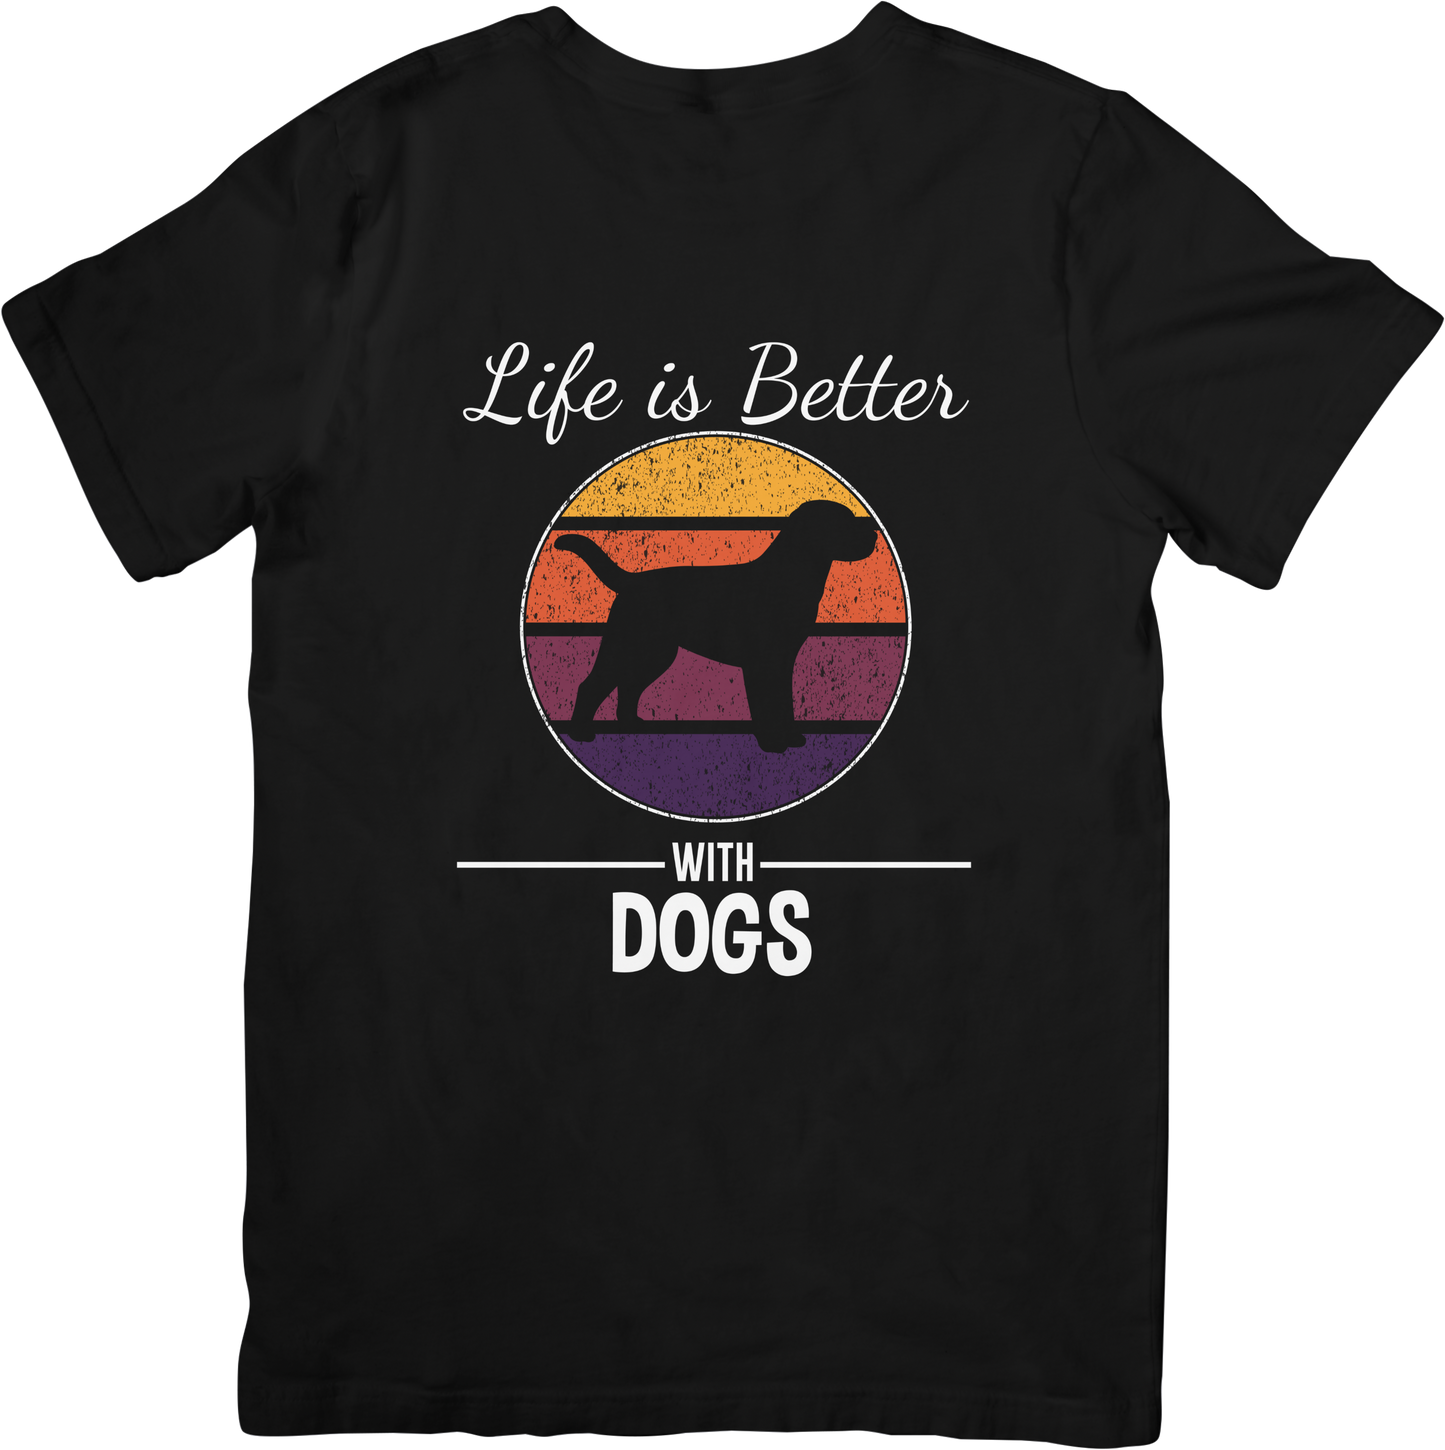 Life is better with dogs